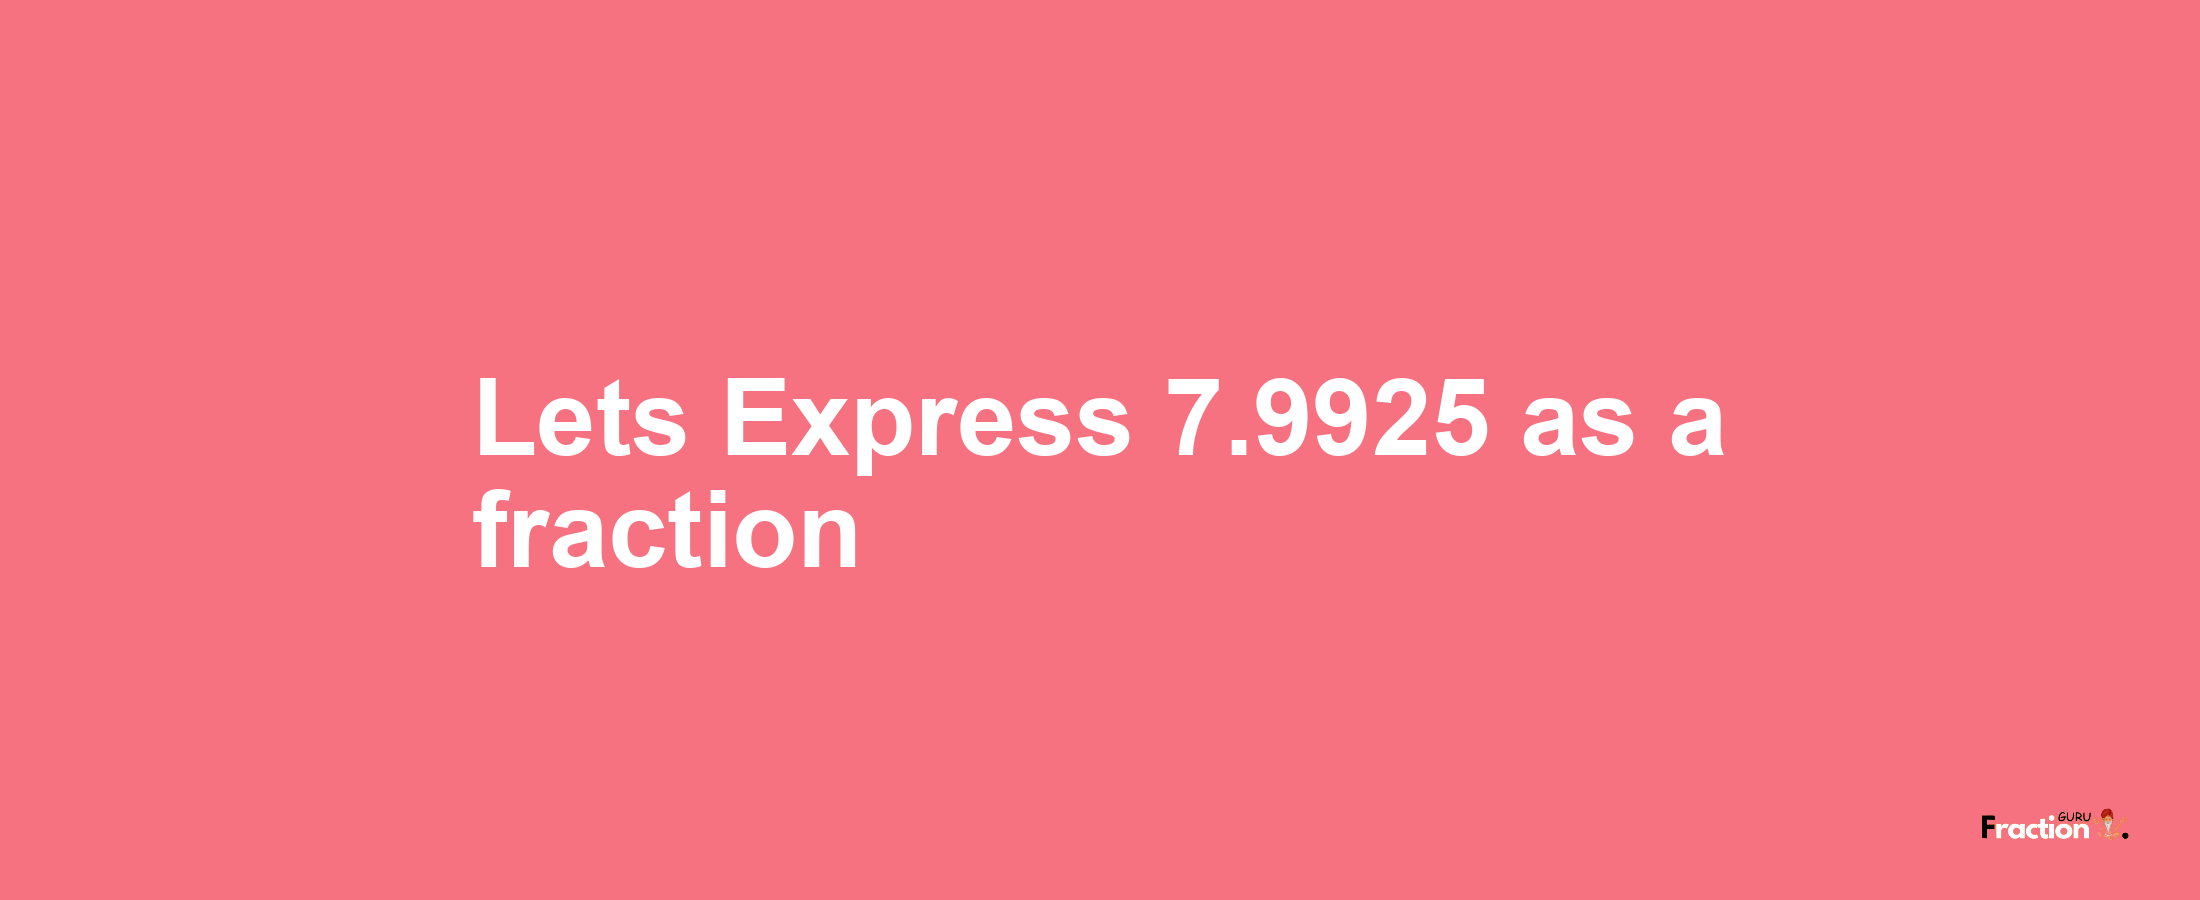 Lets Express 7.9925 as afraction